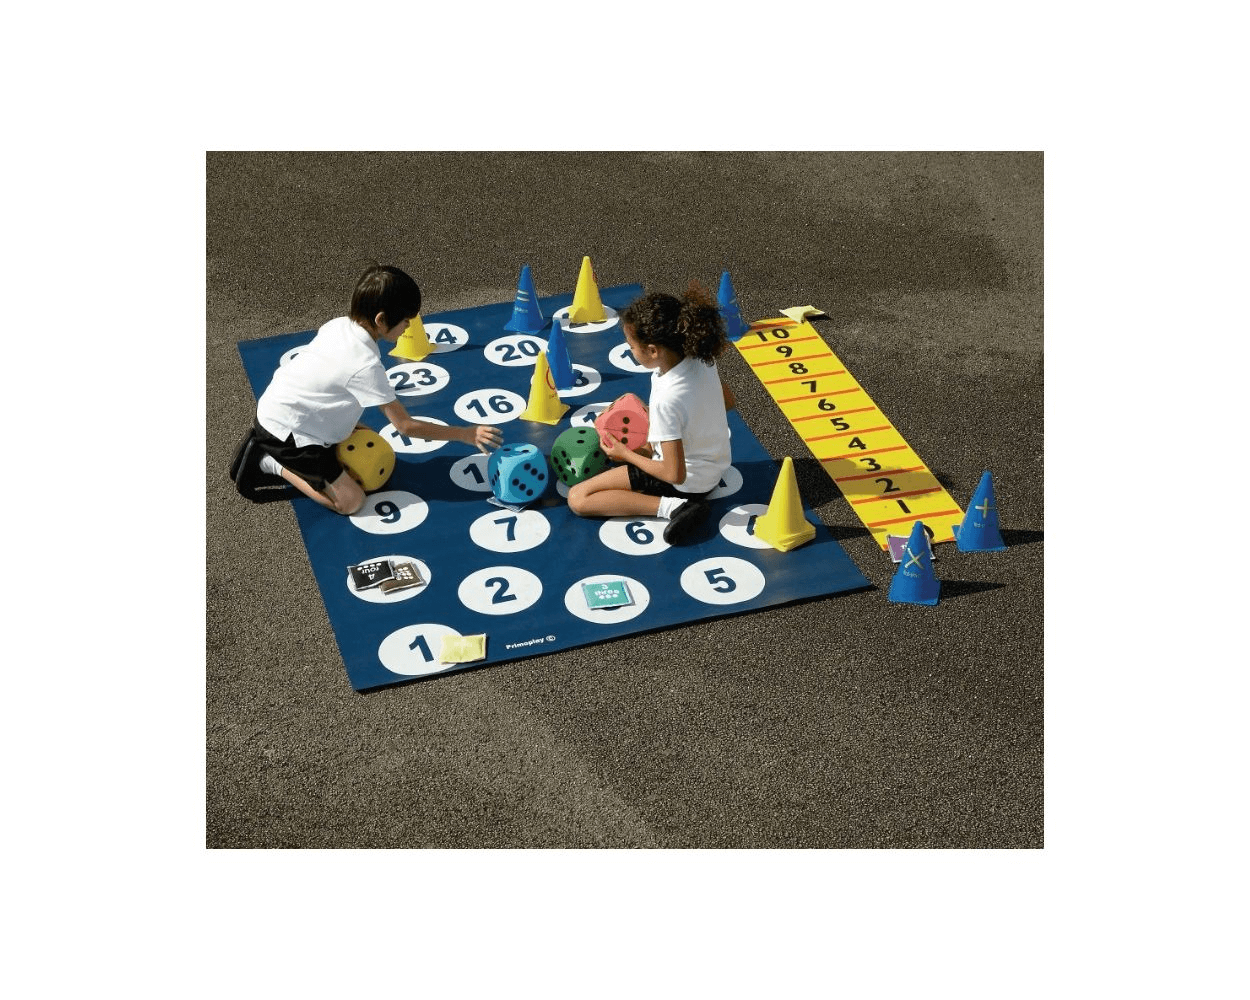 a number mat that is placed outside in a playground with the children sitting on it playing a game